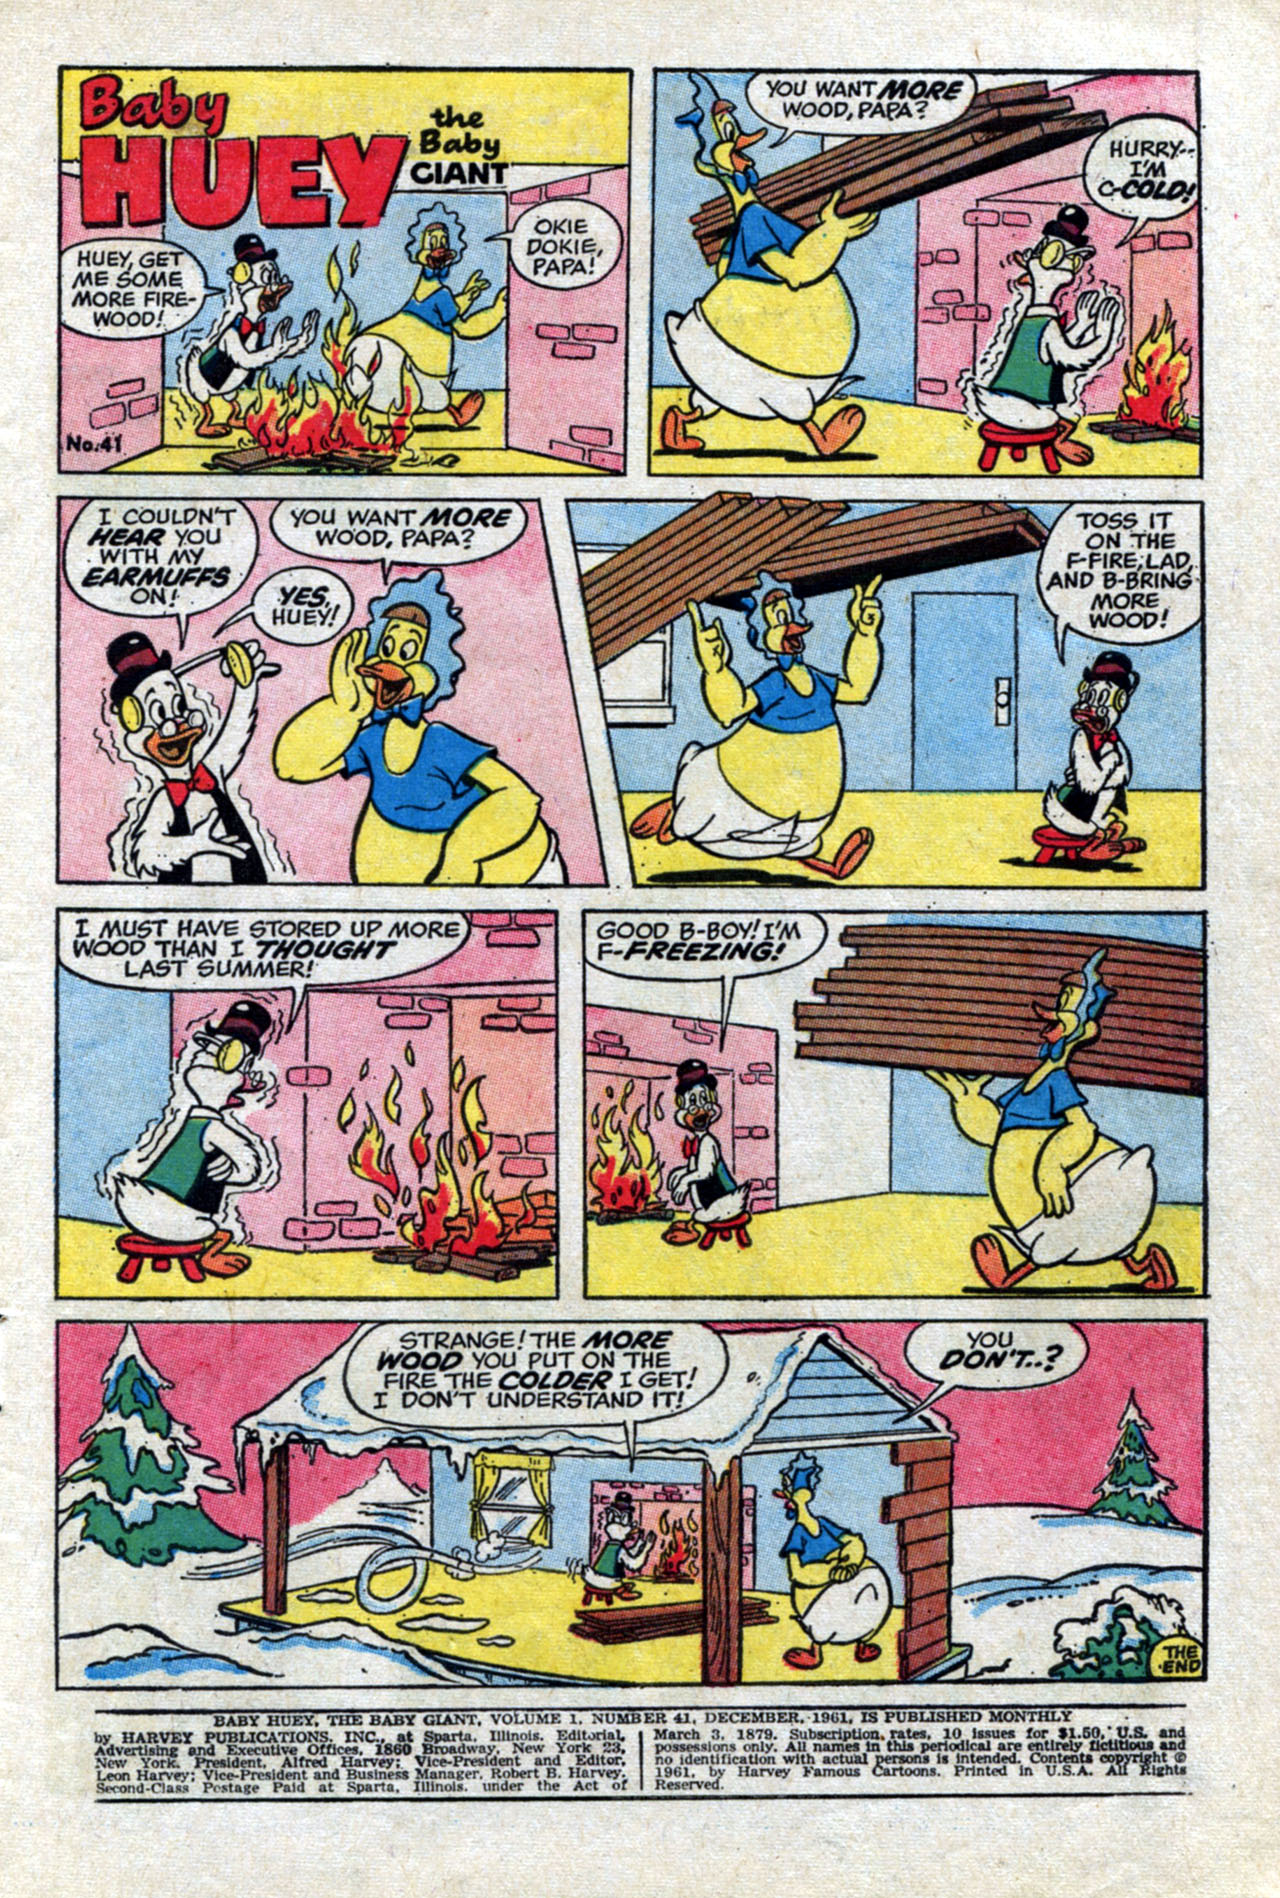 Read online Baby Huey, the Baby Giant comic -  Issue #41 - 3